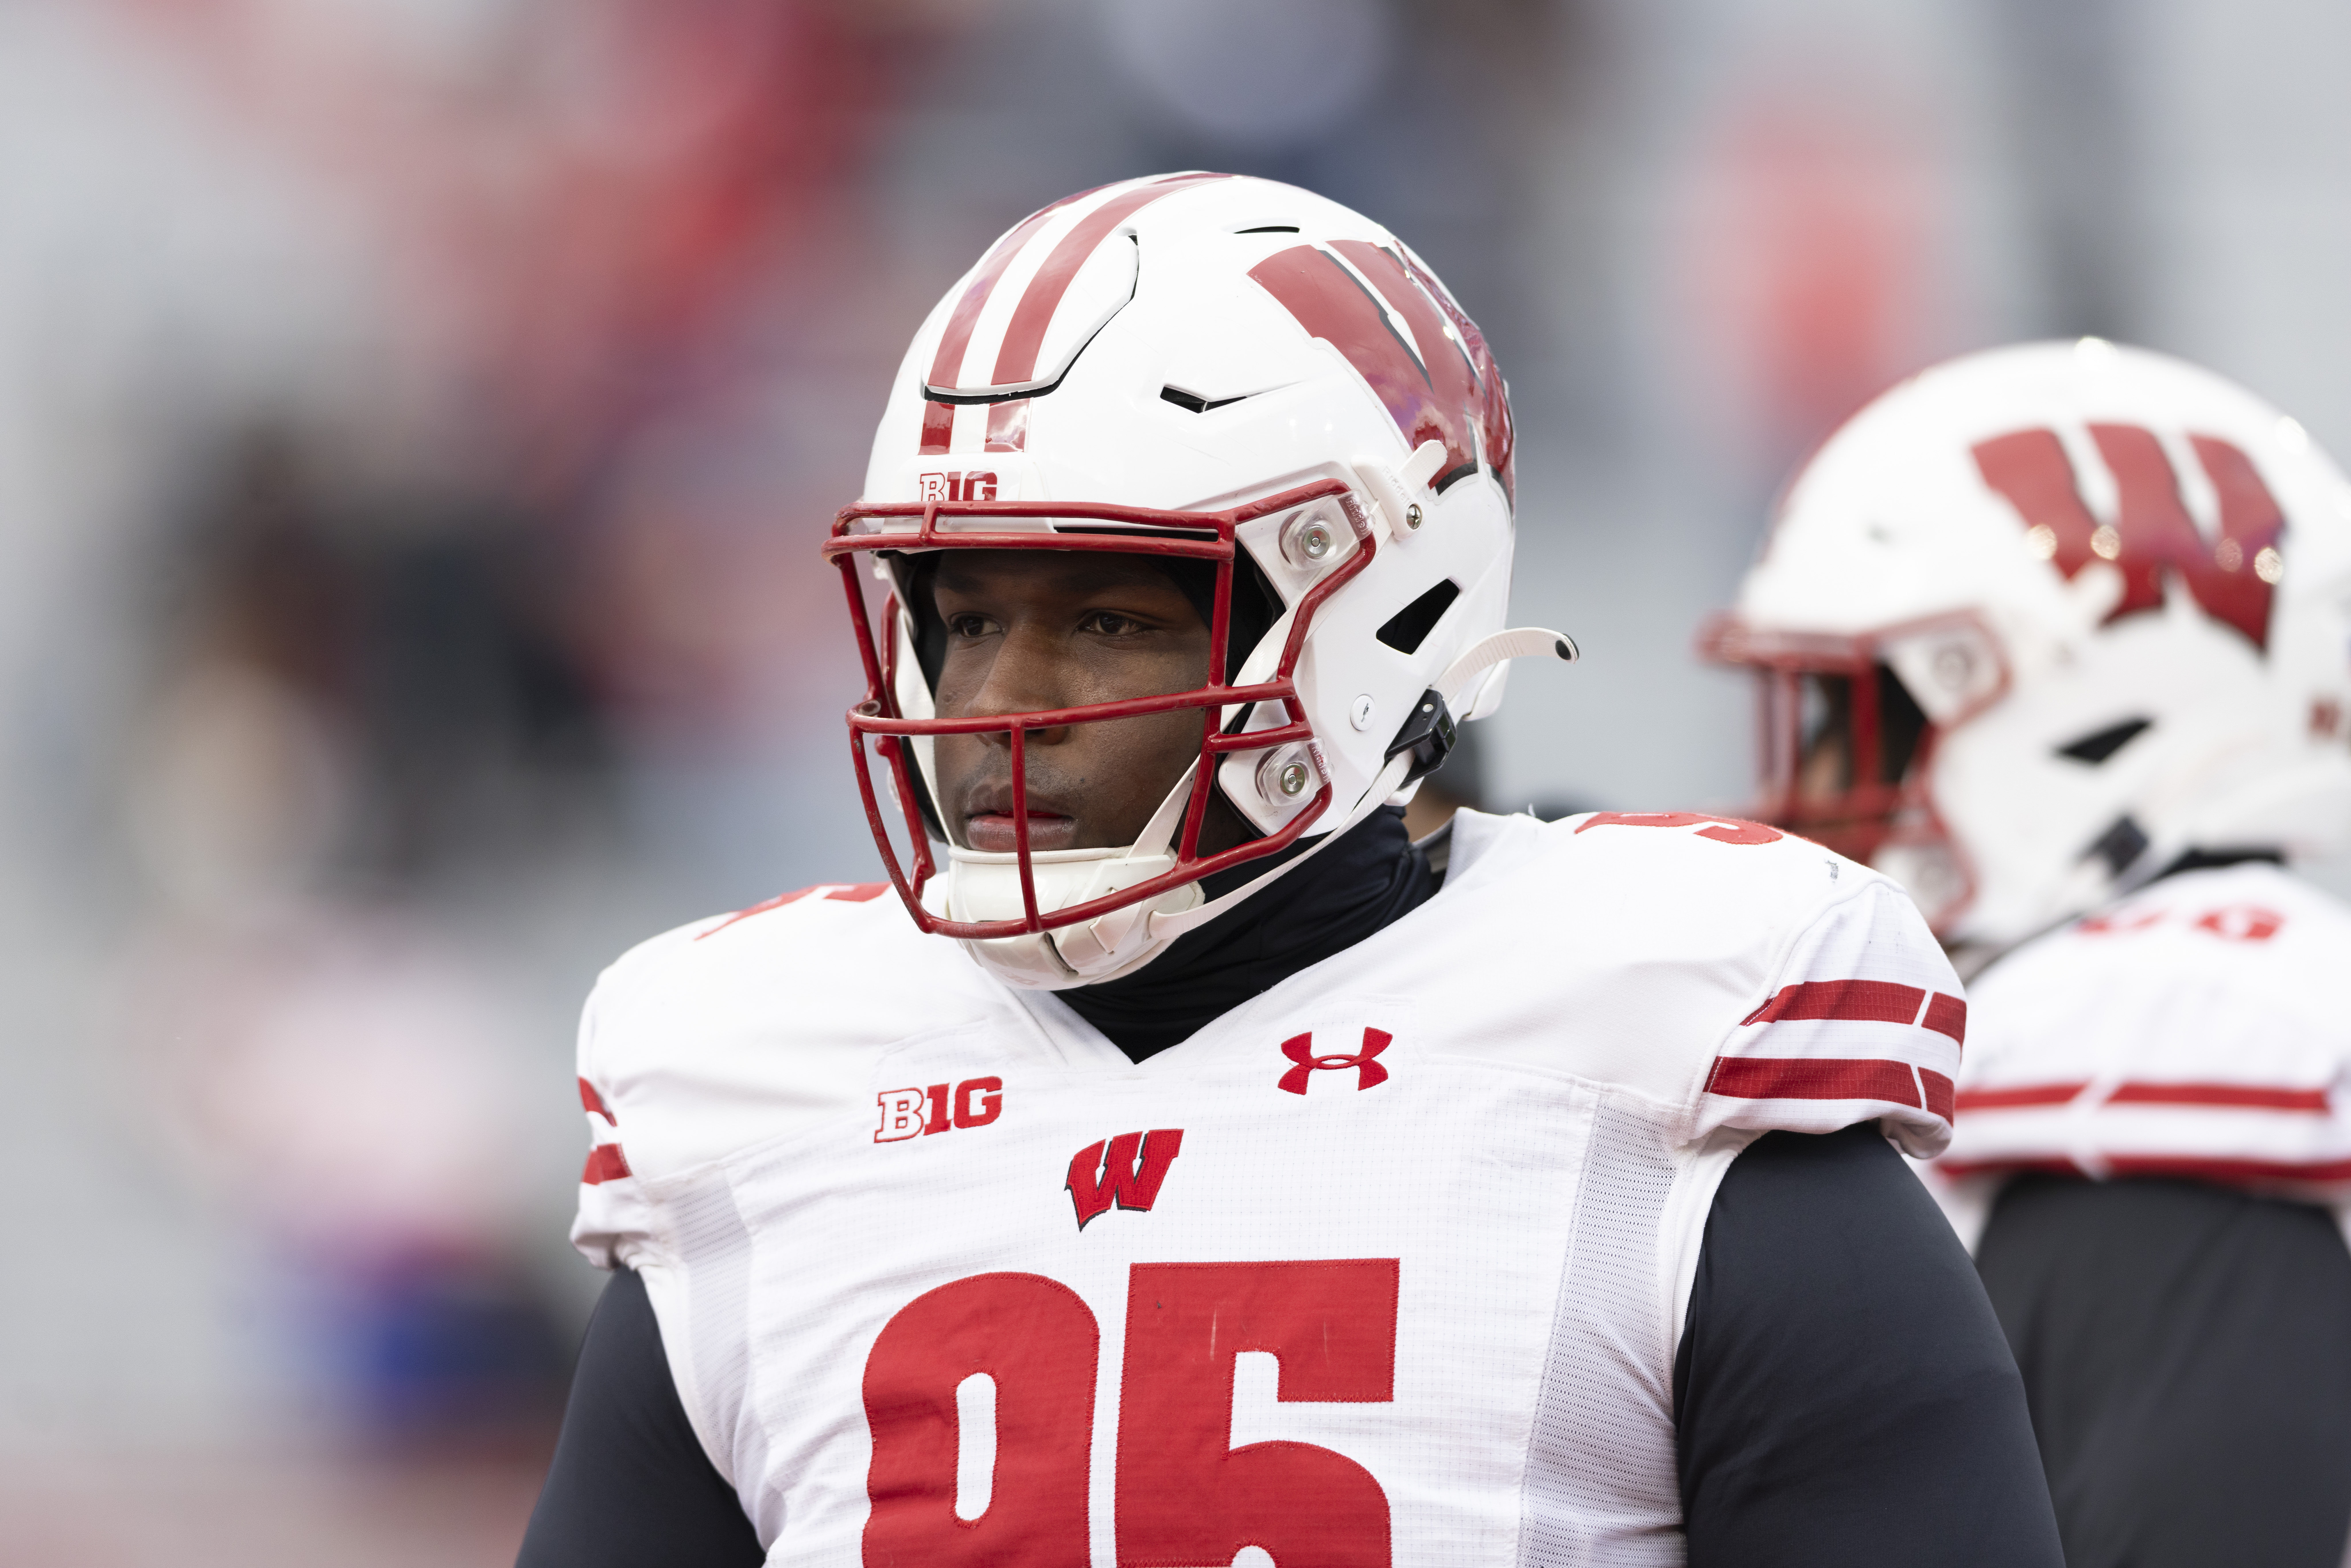 Former Badger DT Keeanu Benton drafted No. #49 overall to Steelers